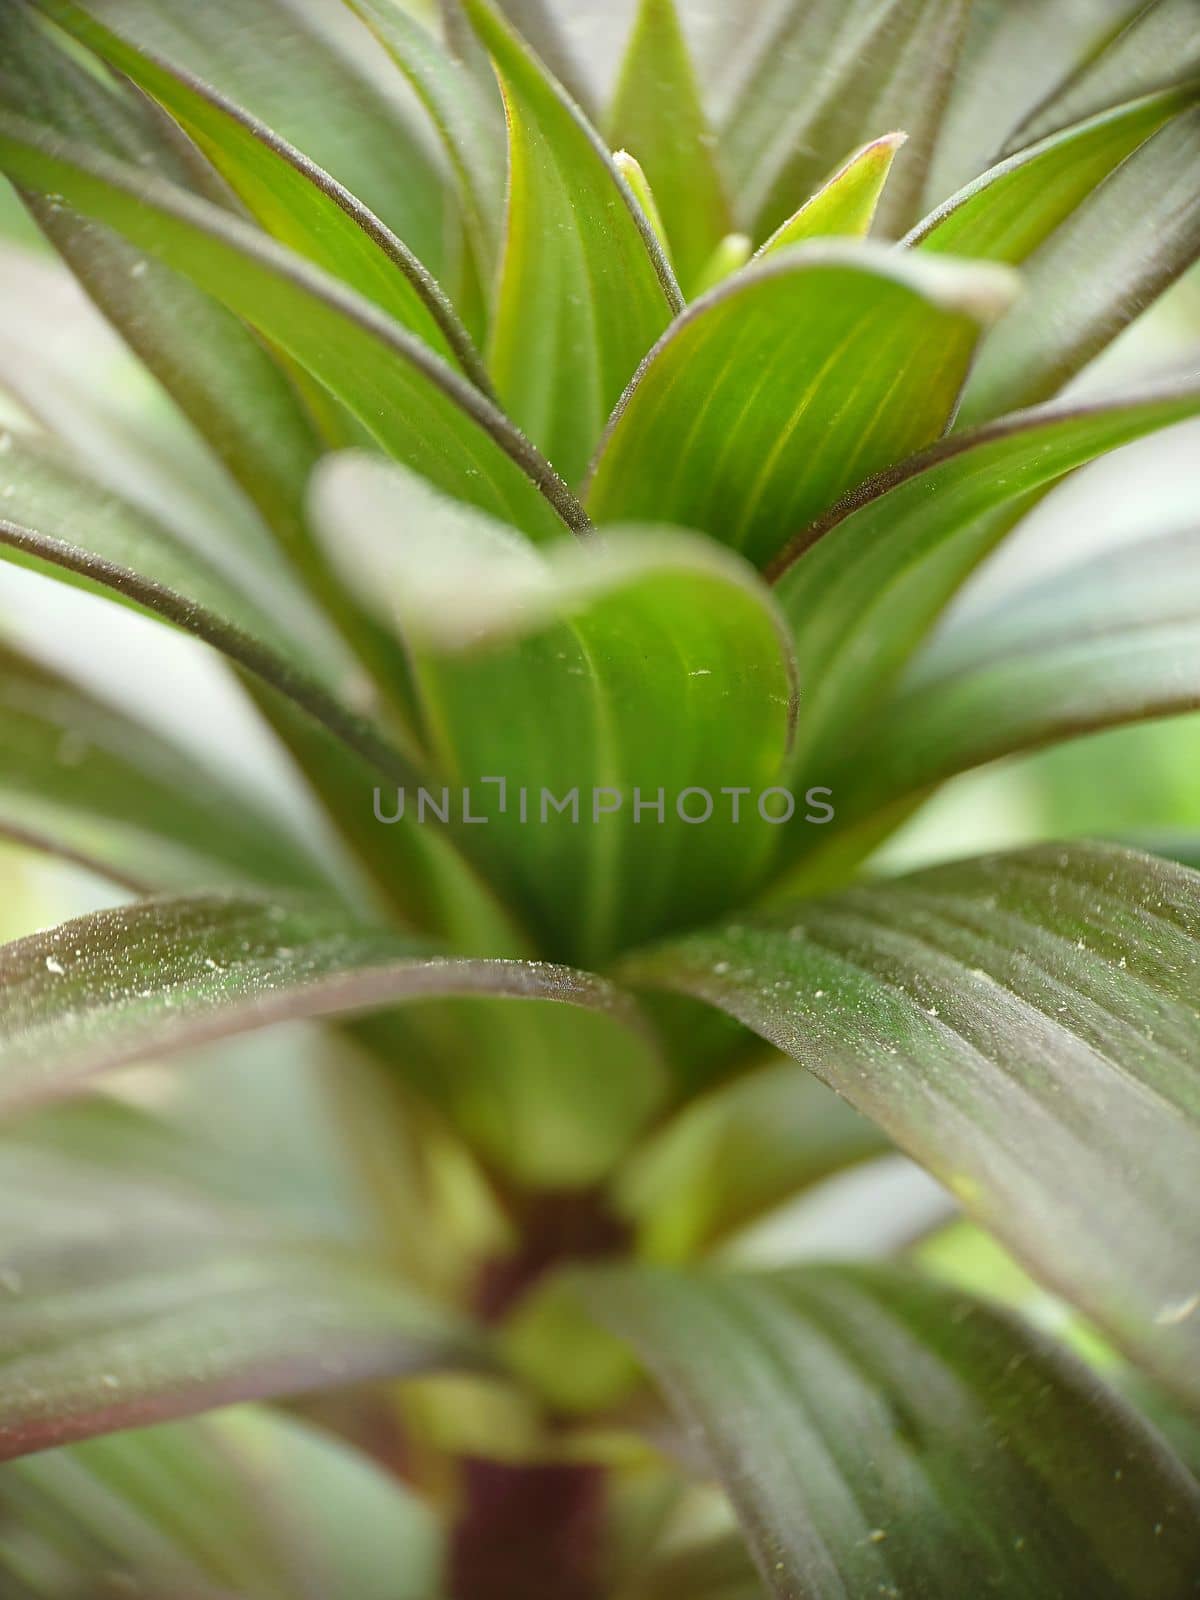 Background image of lily foliage without a flower close-up.Texture or background.Macrophotography.